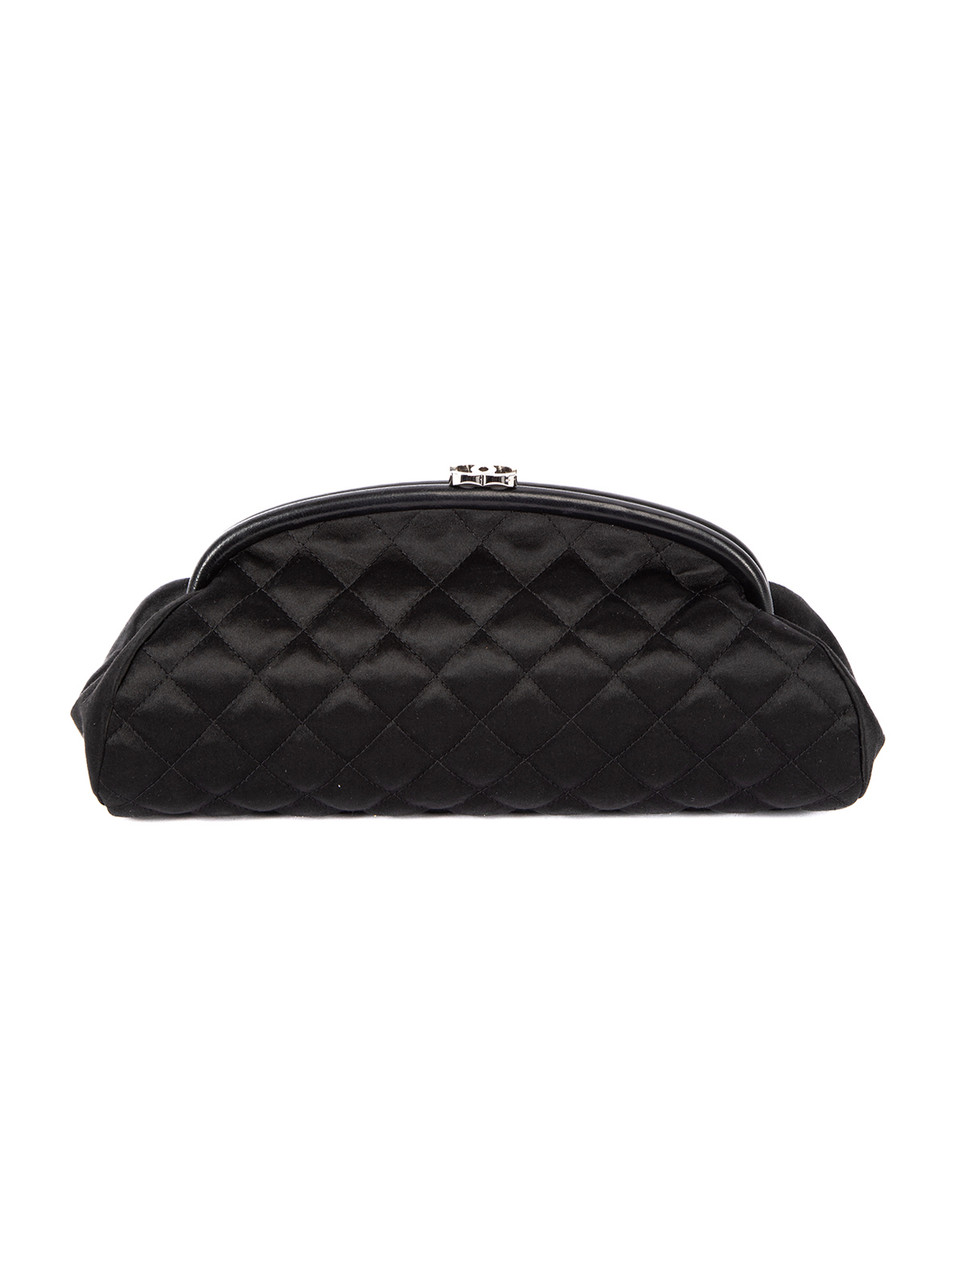 Chanel Quilted Half Moon Clutch